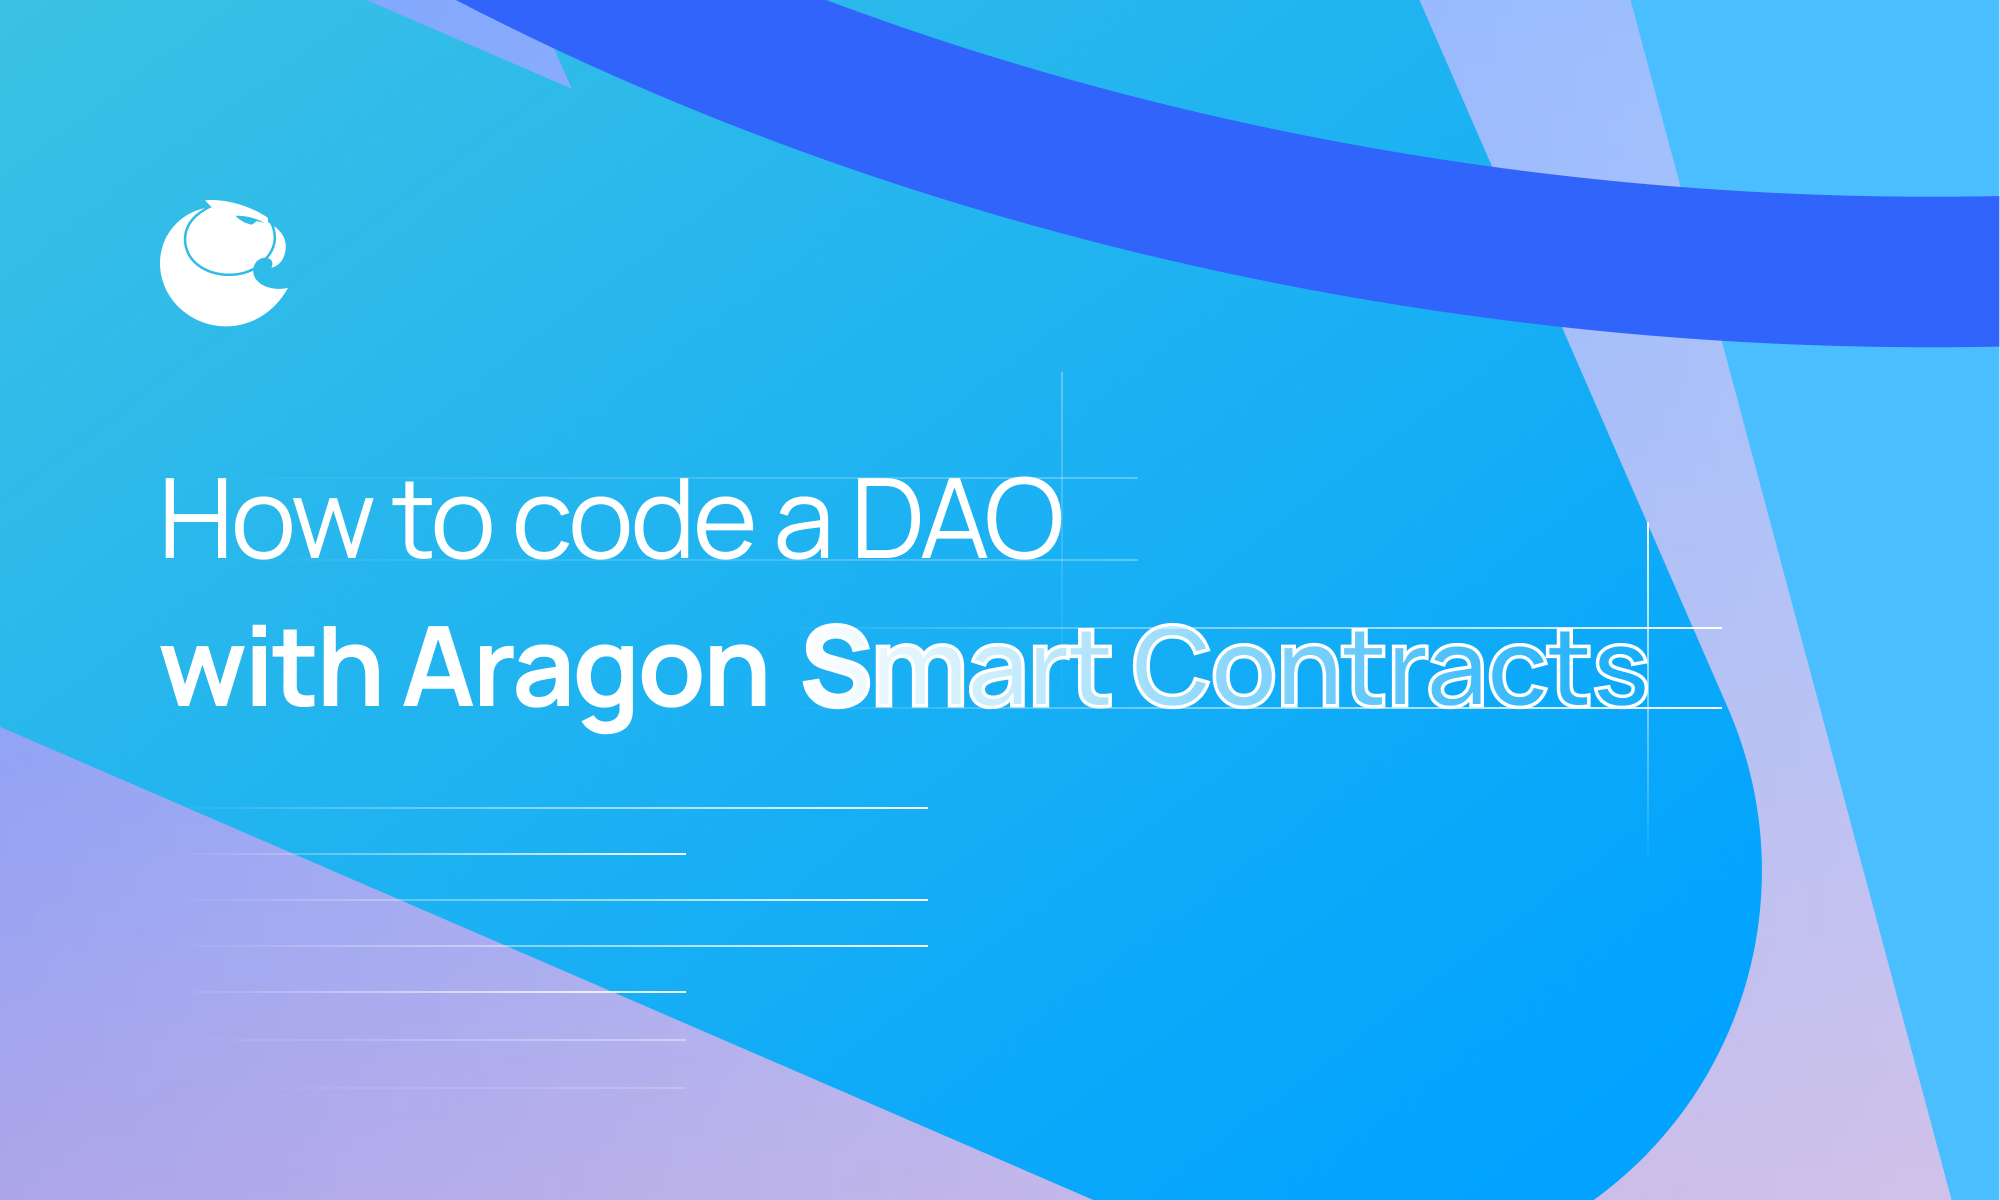 DAO Framework: How to Code a DAO with Aragon Smart Contracts